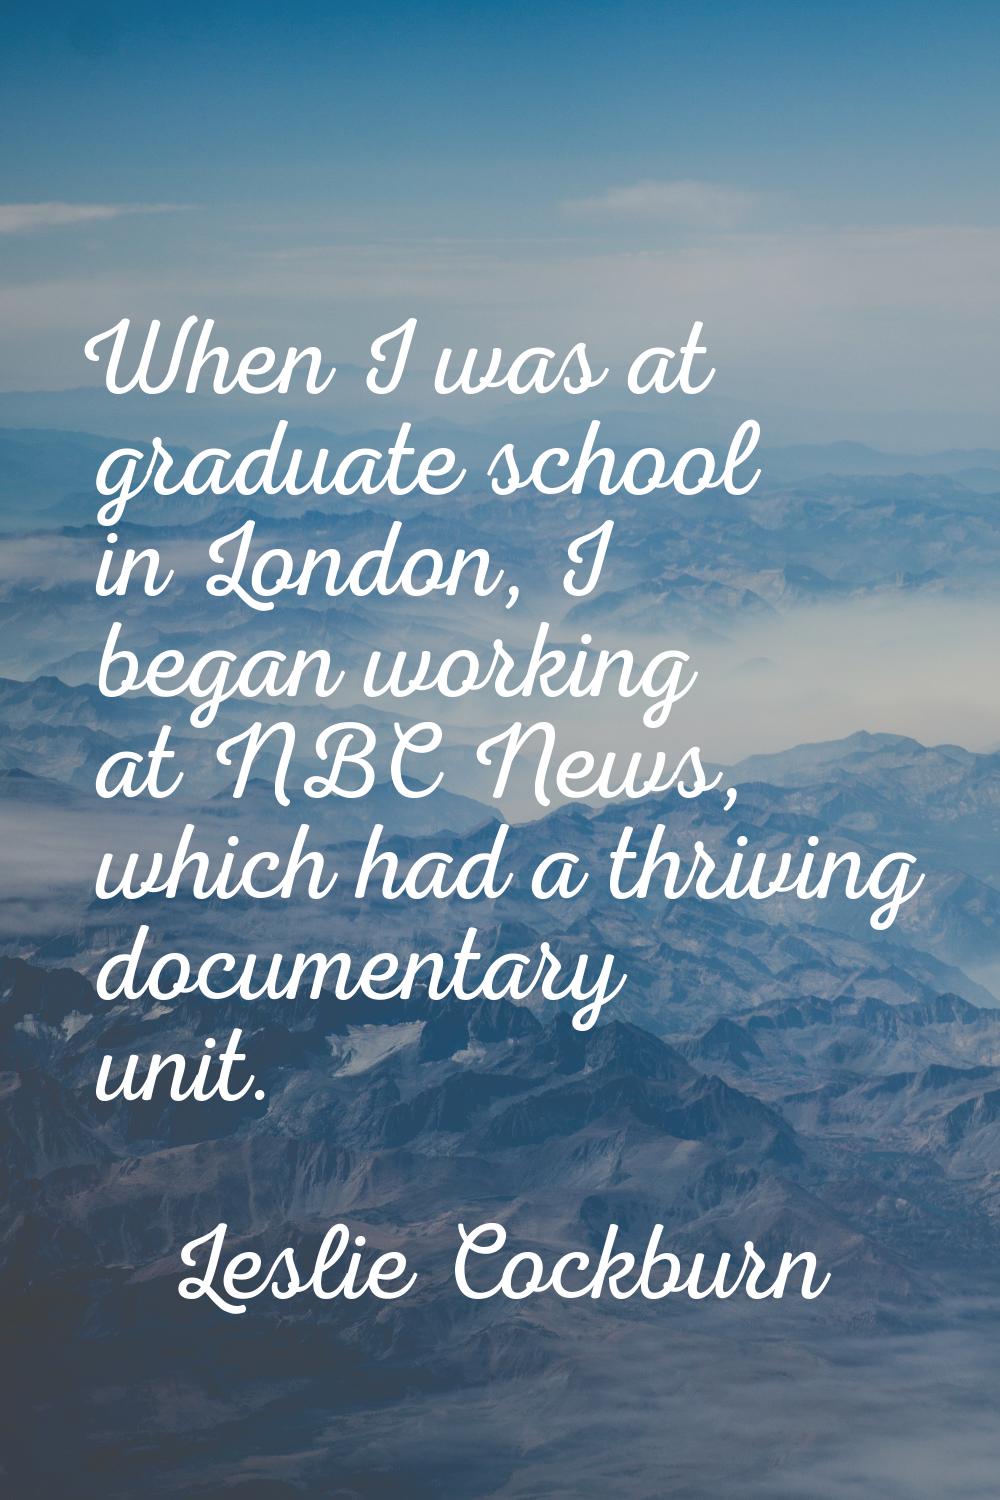 When I was at graduate school in London, I began working at NBC News, which had a thriving document